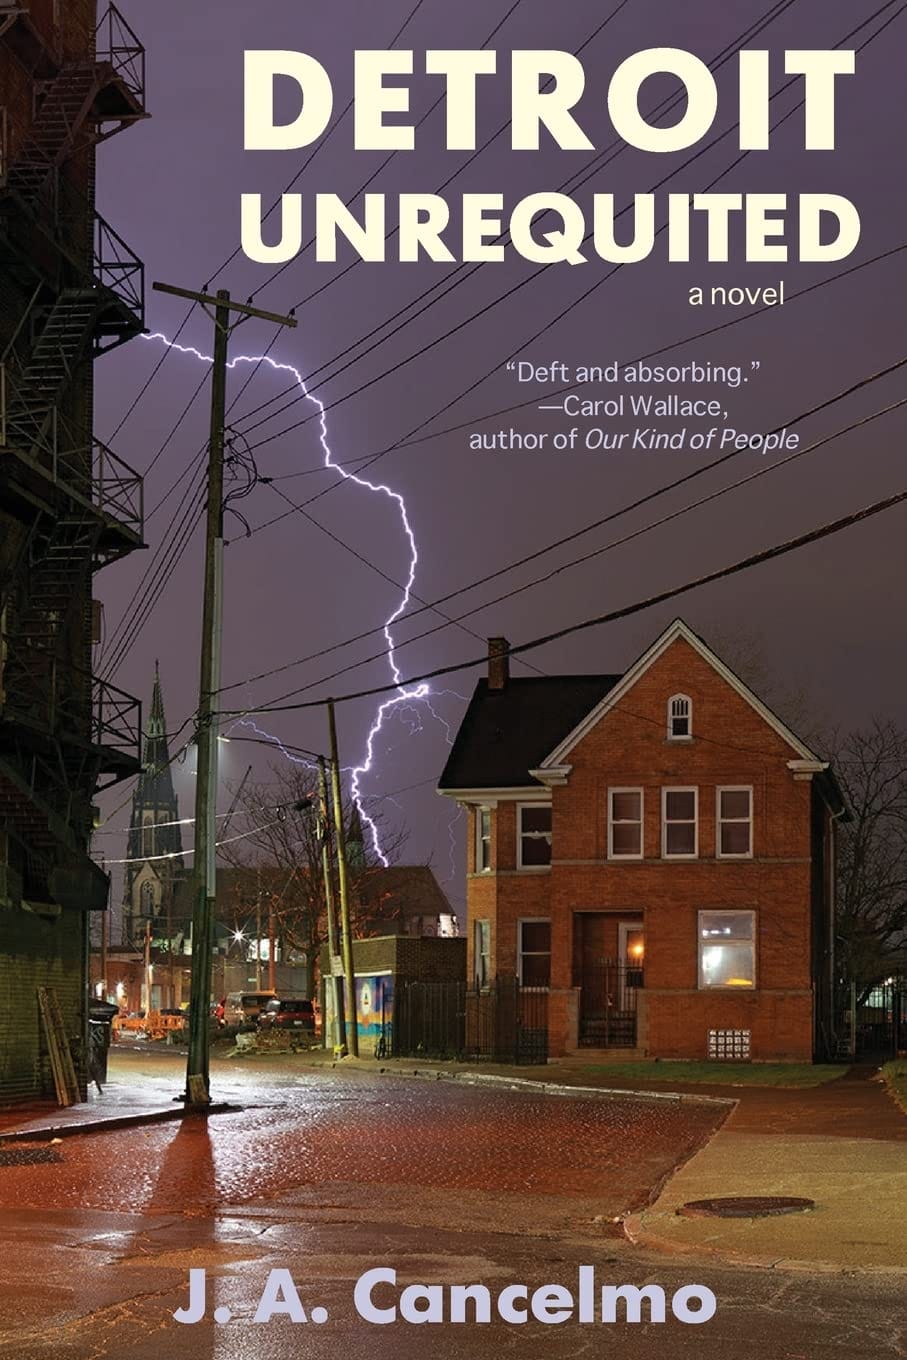 Detroit Unrequited: Excerpts and Context